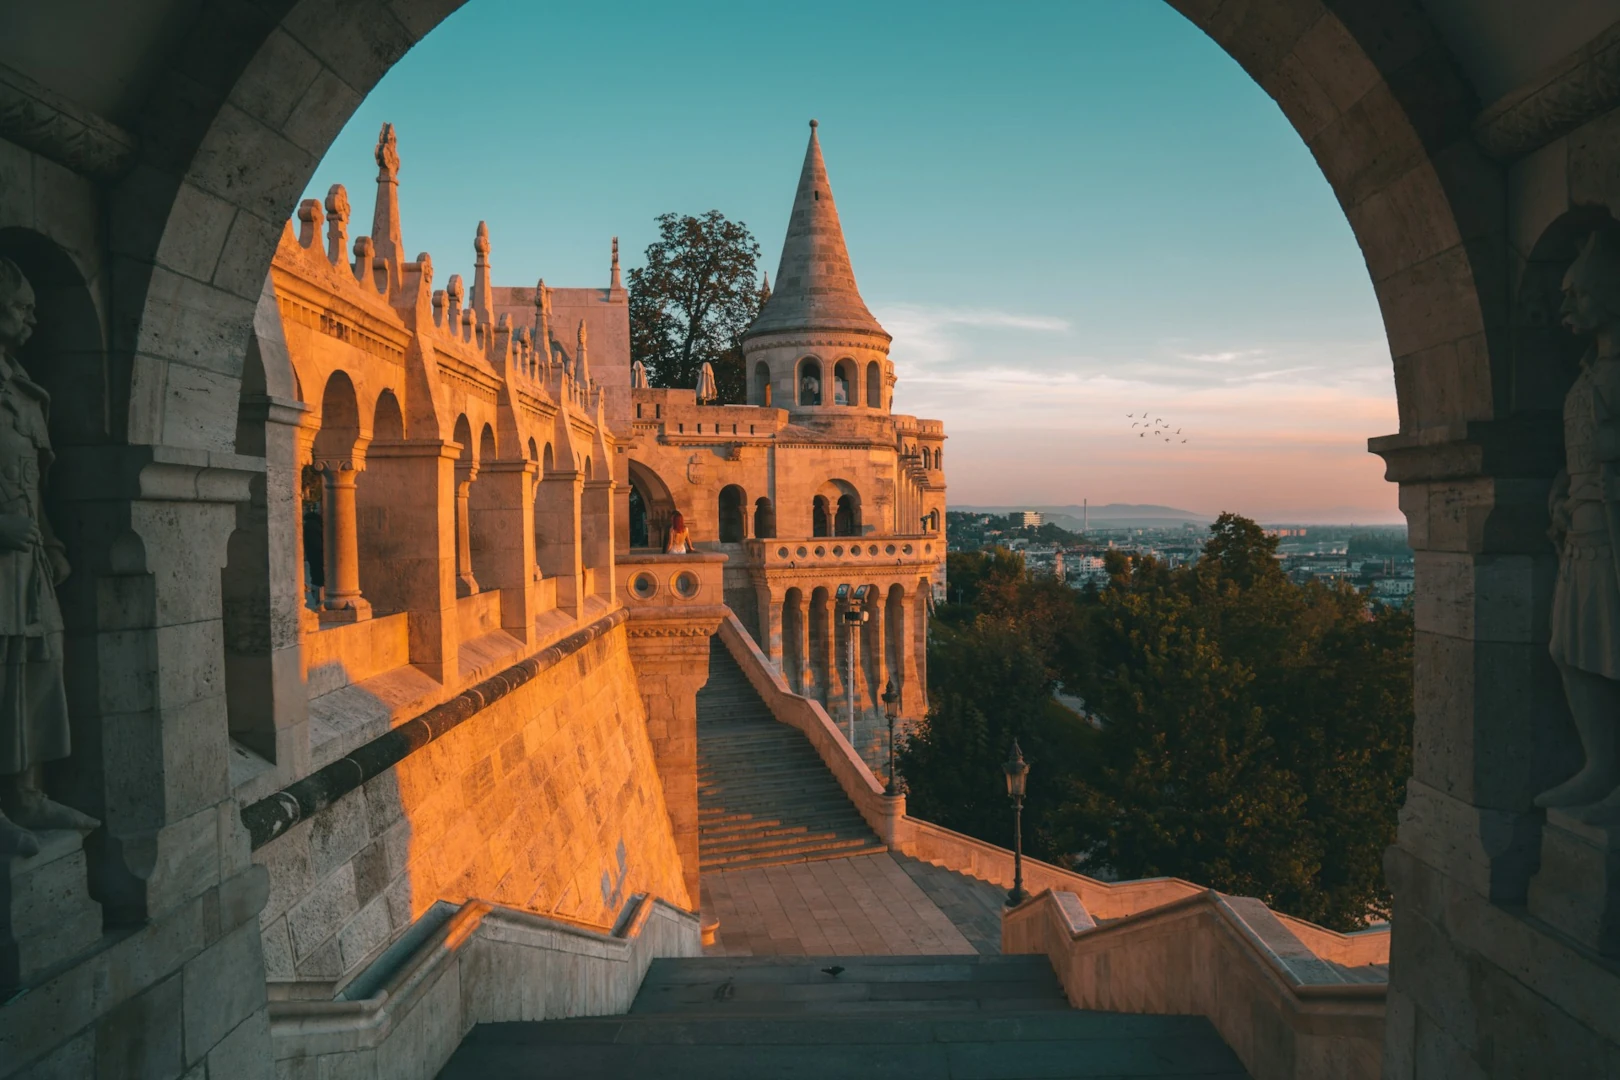 A medieval-style castle, with grand views over the Danube, glows orange in the light of the setting sun.